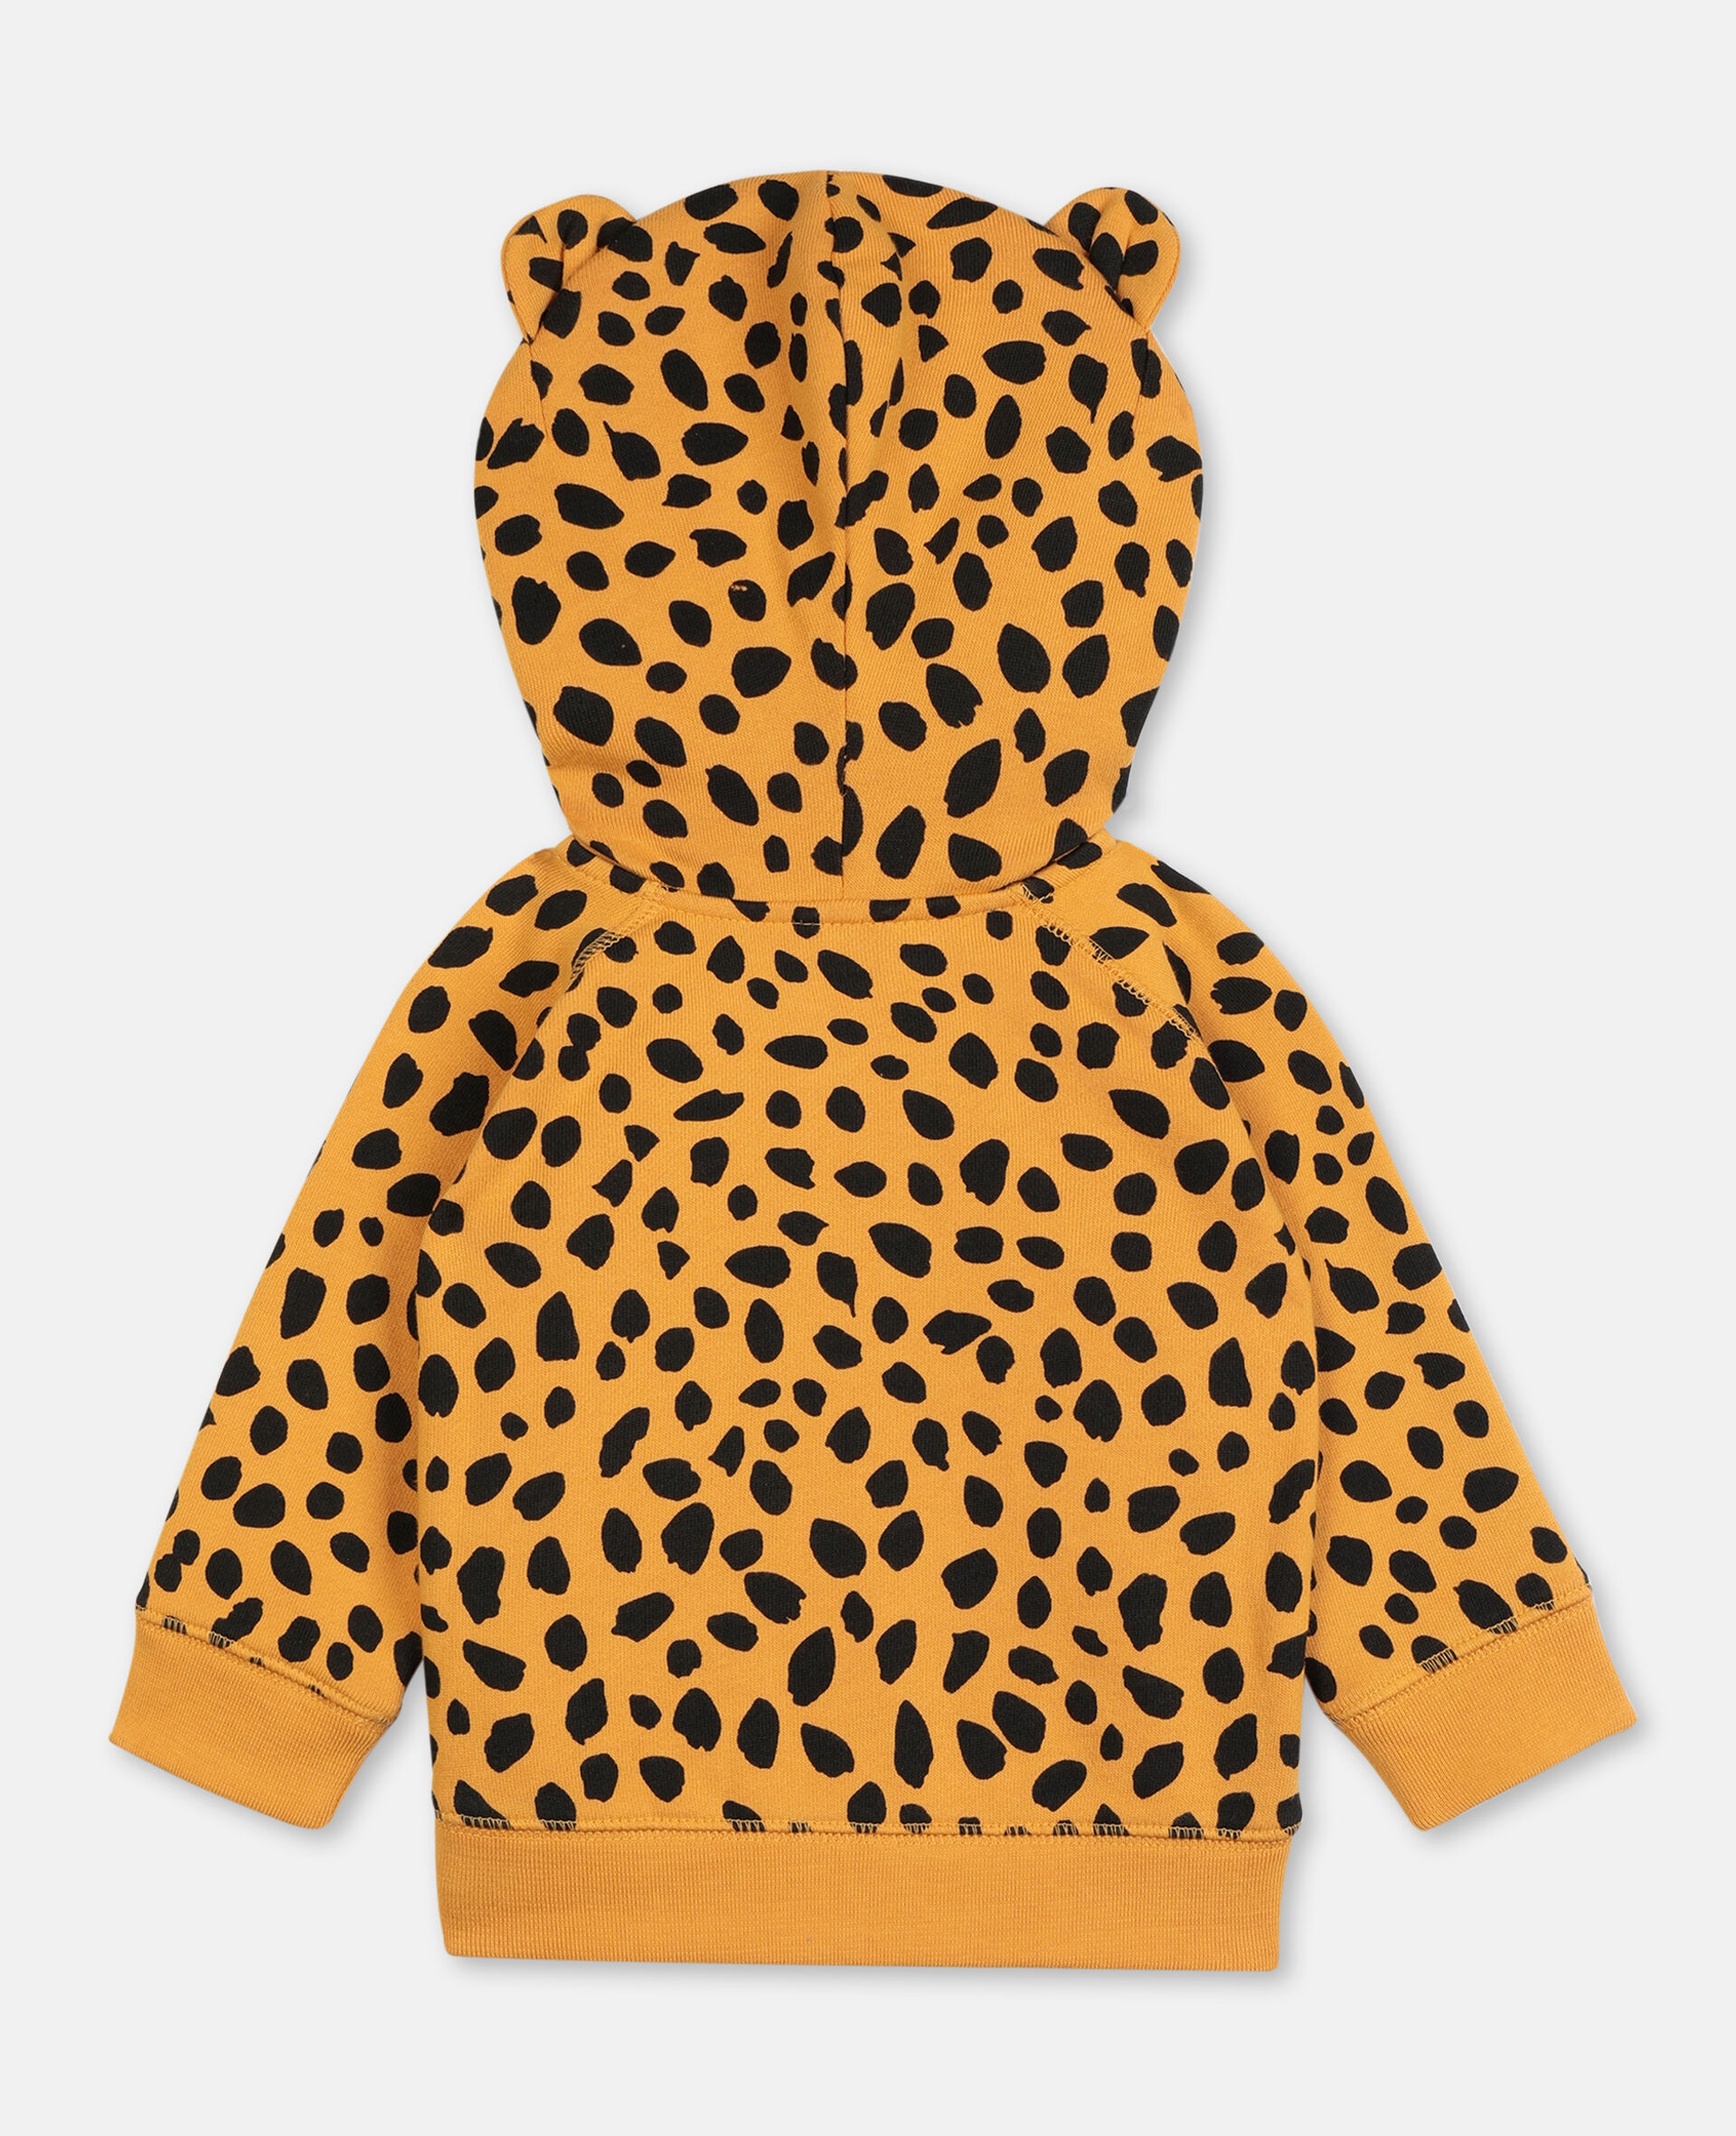 Cheetah Dots Cotton Hoodie -Multicolour-large image number 4